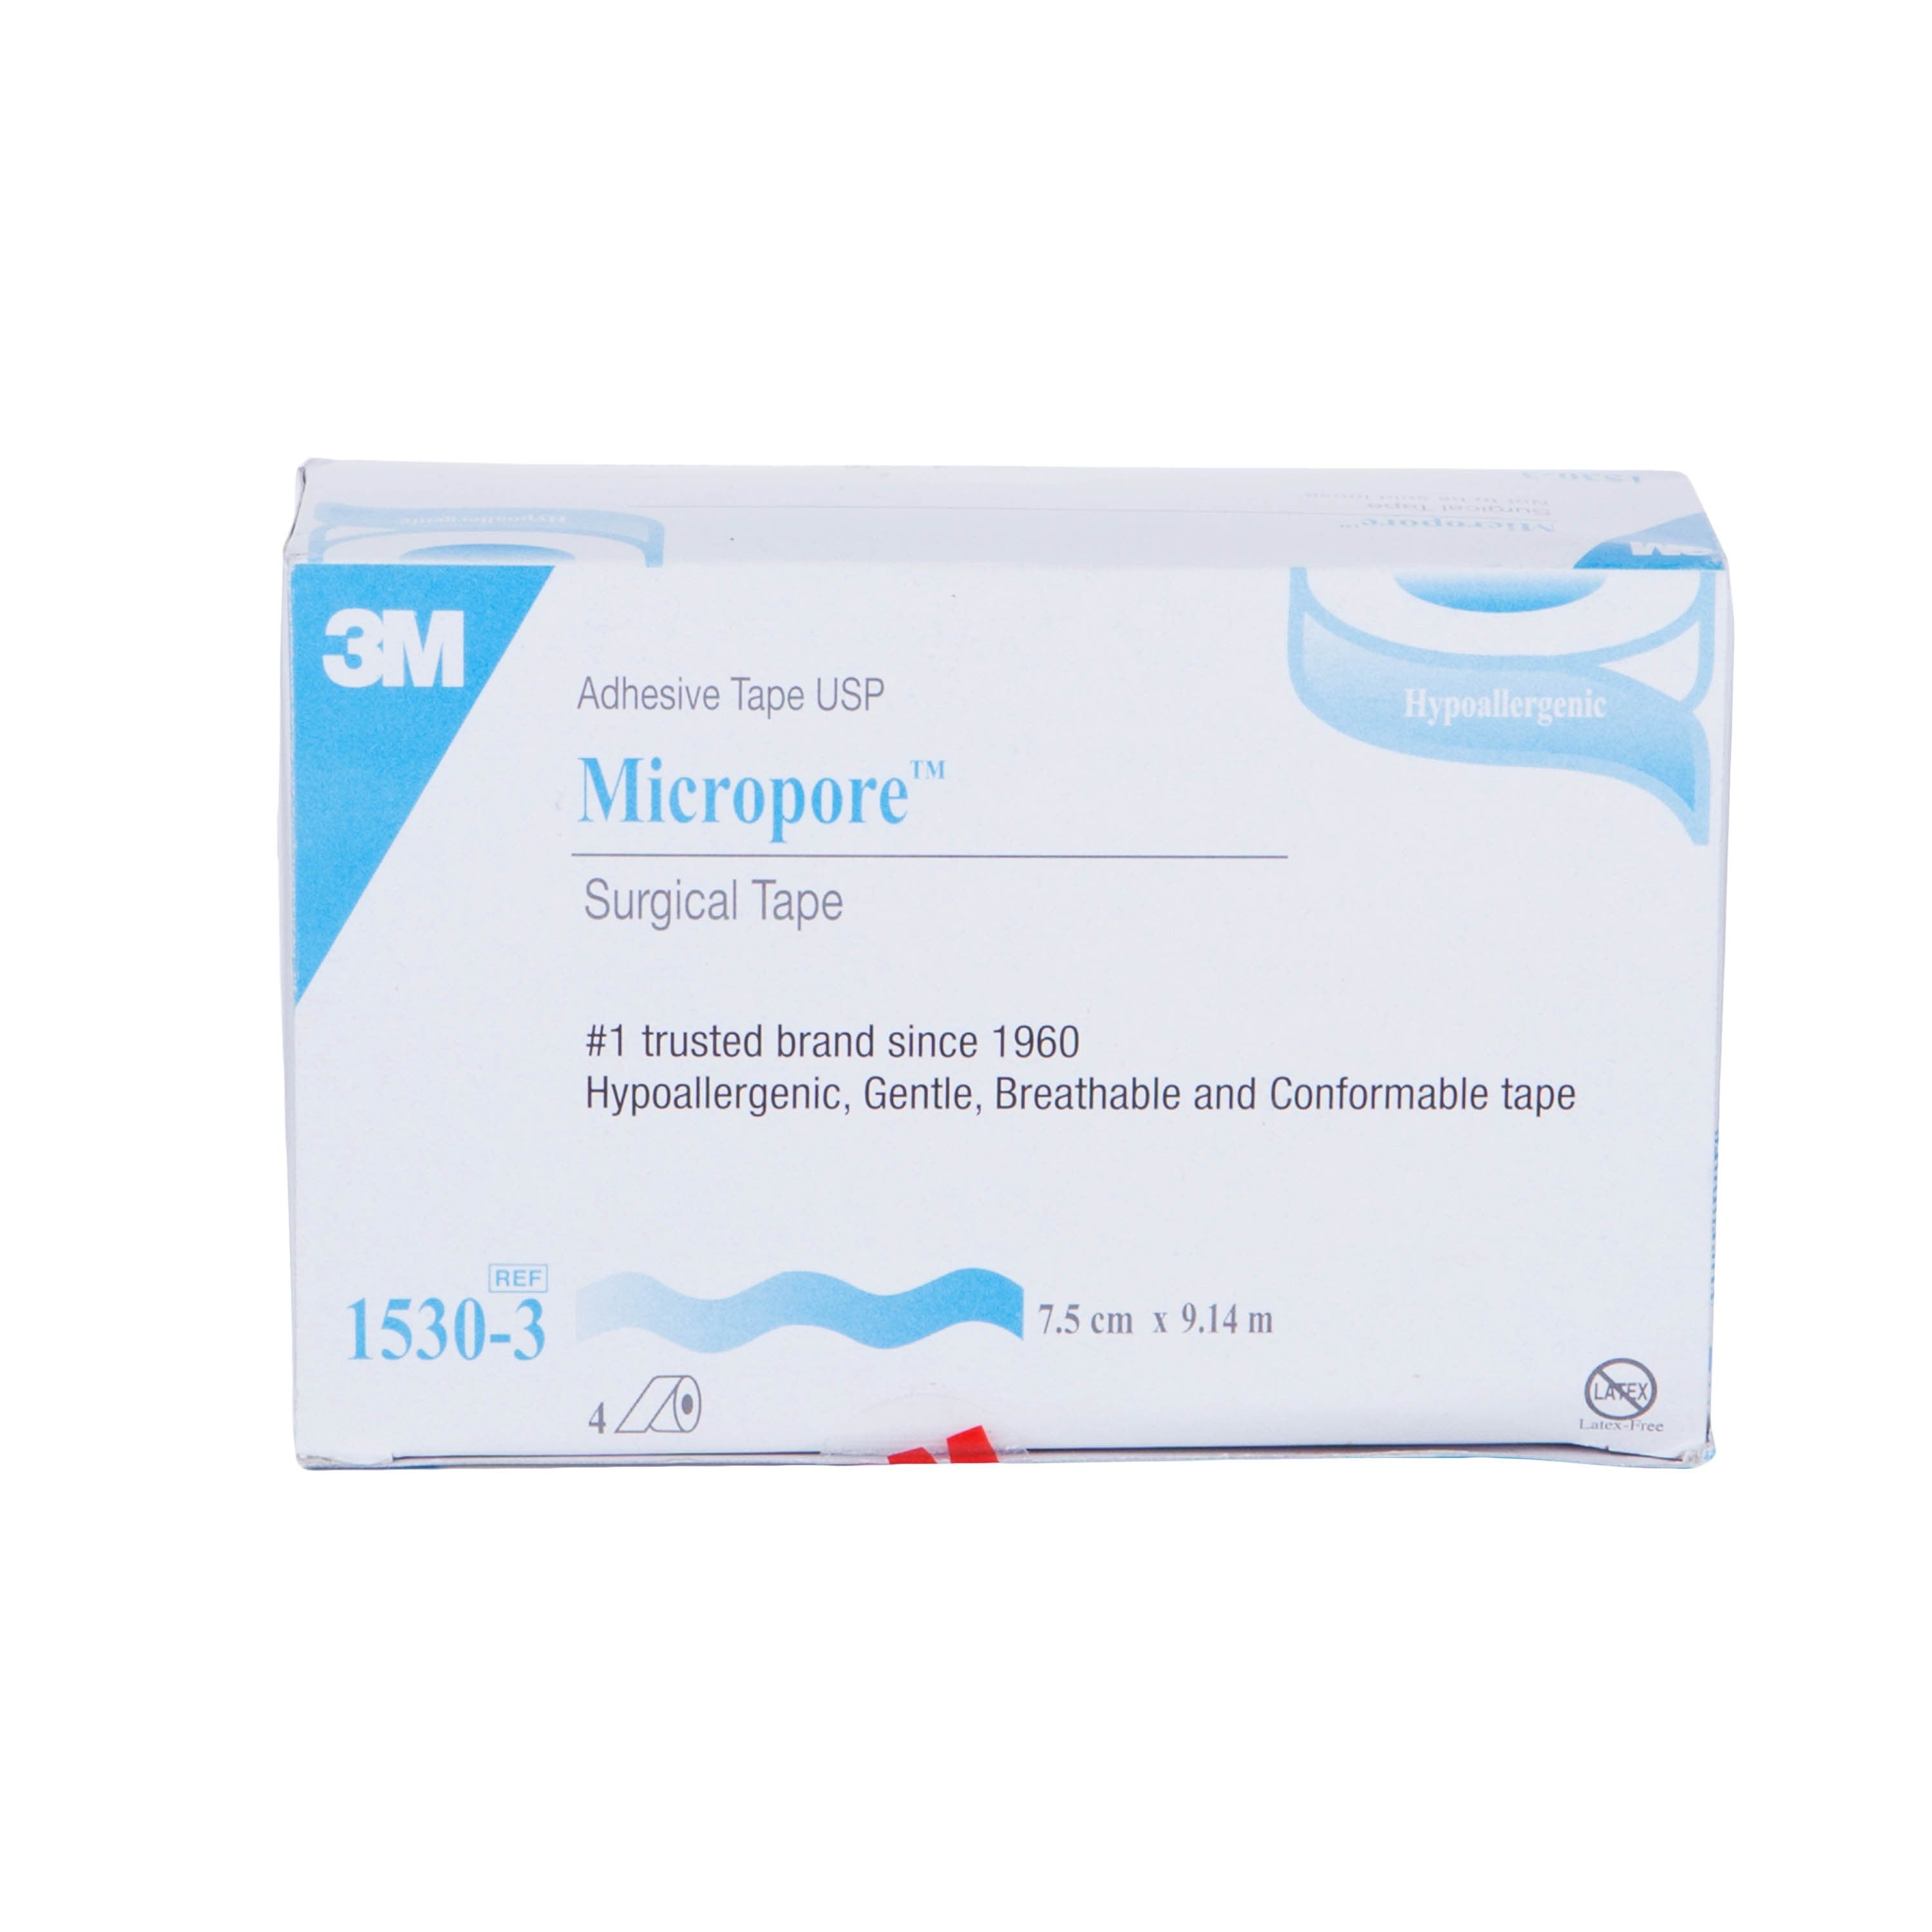 Two versions of 3M Micropore 1530-2?